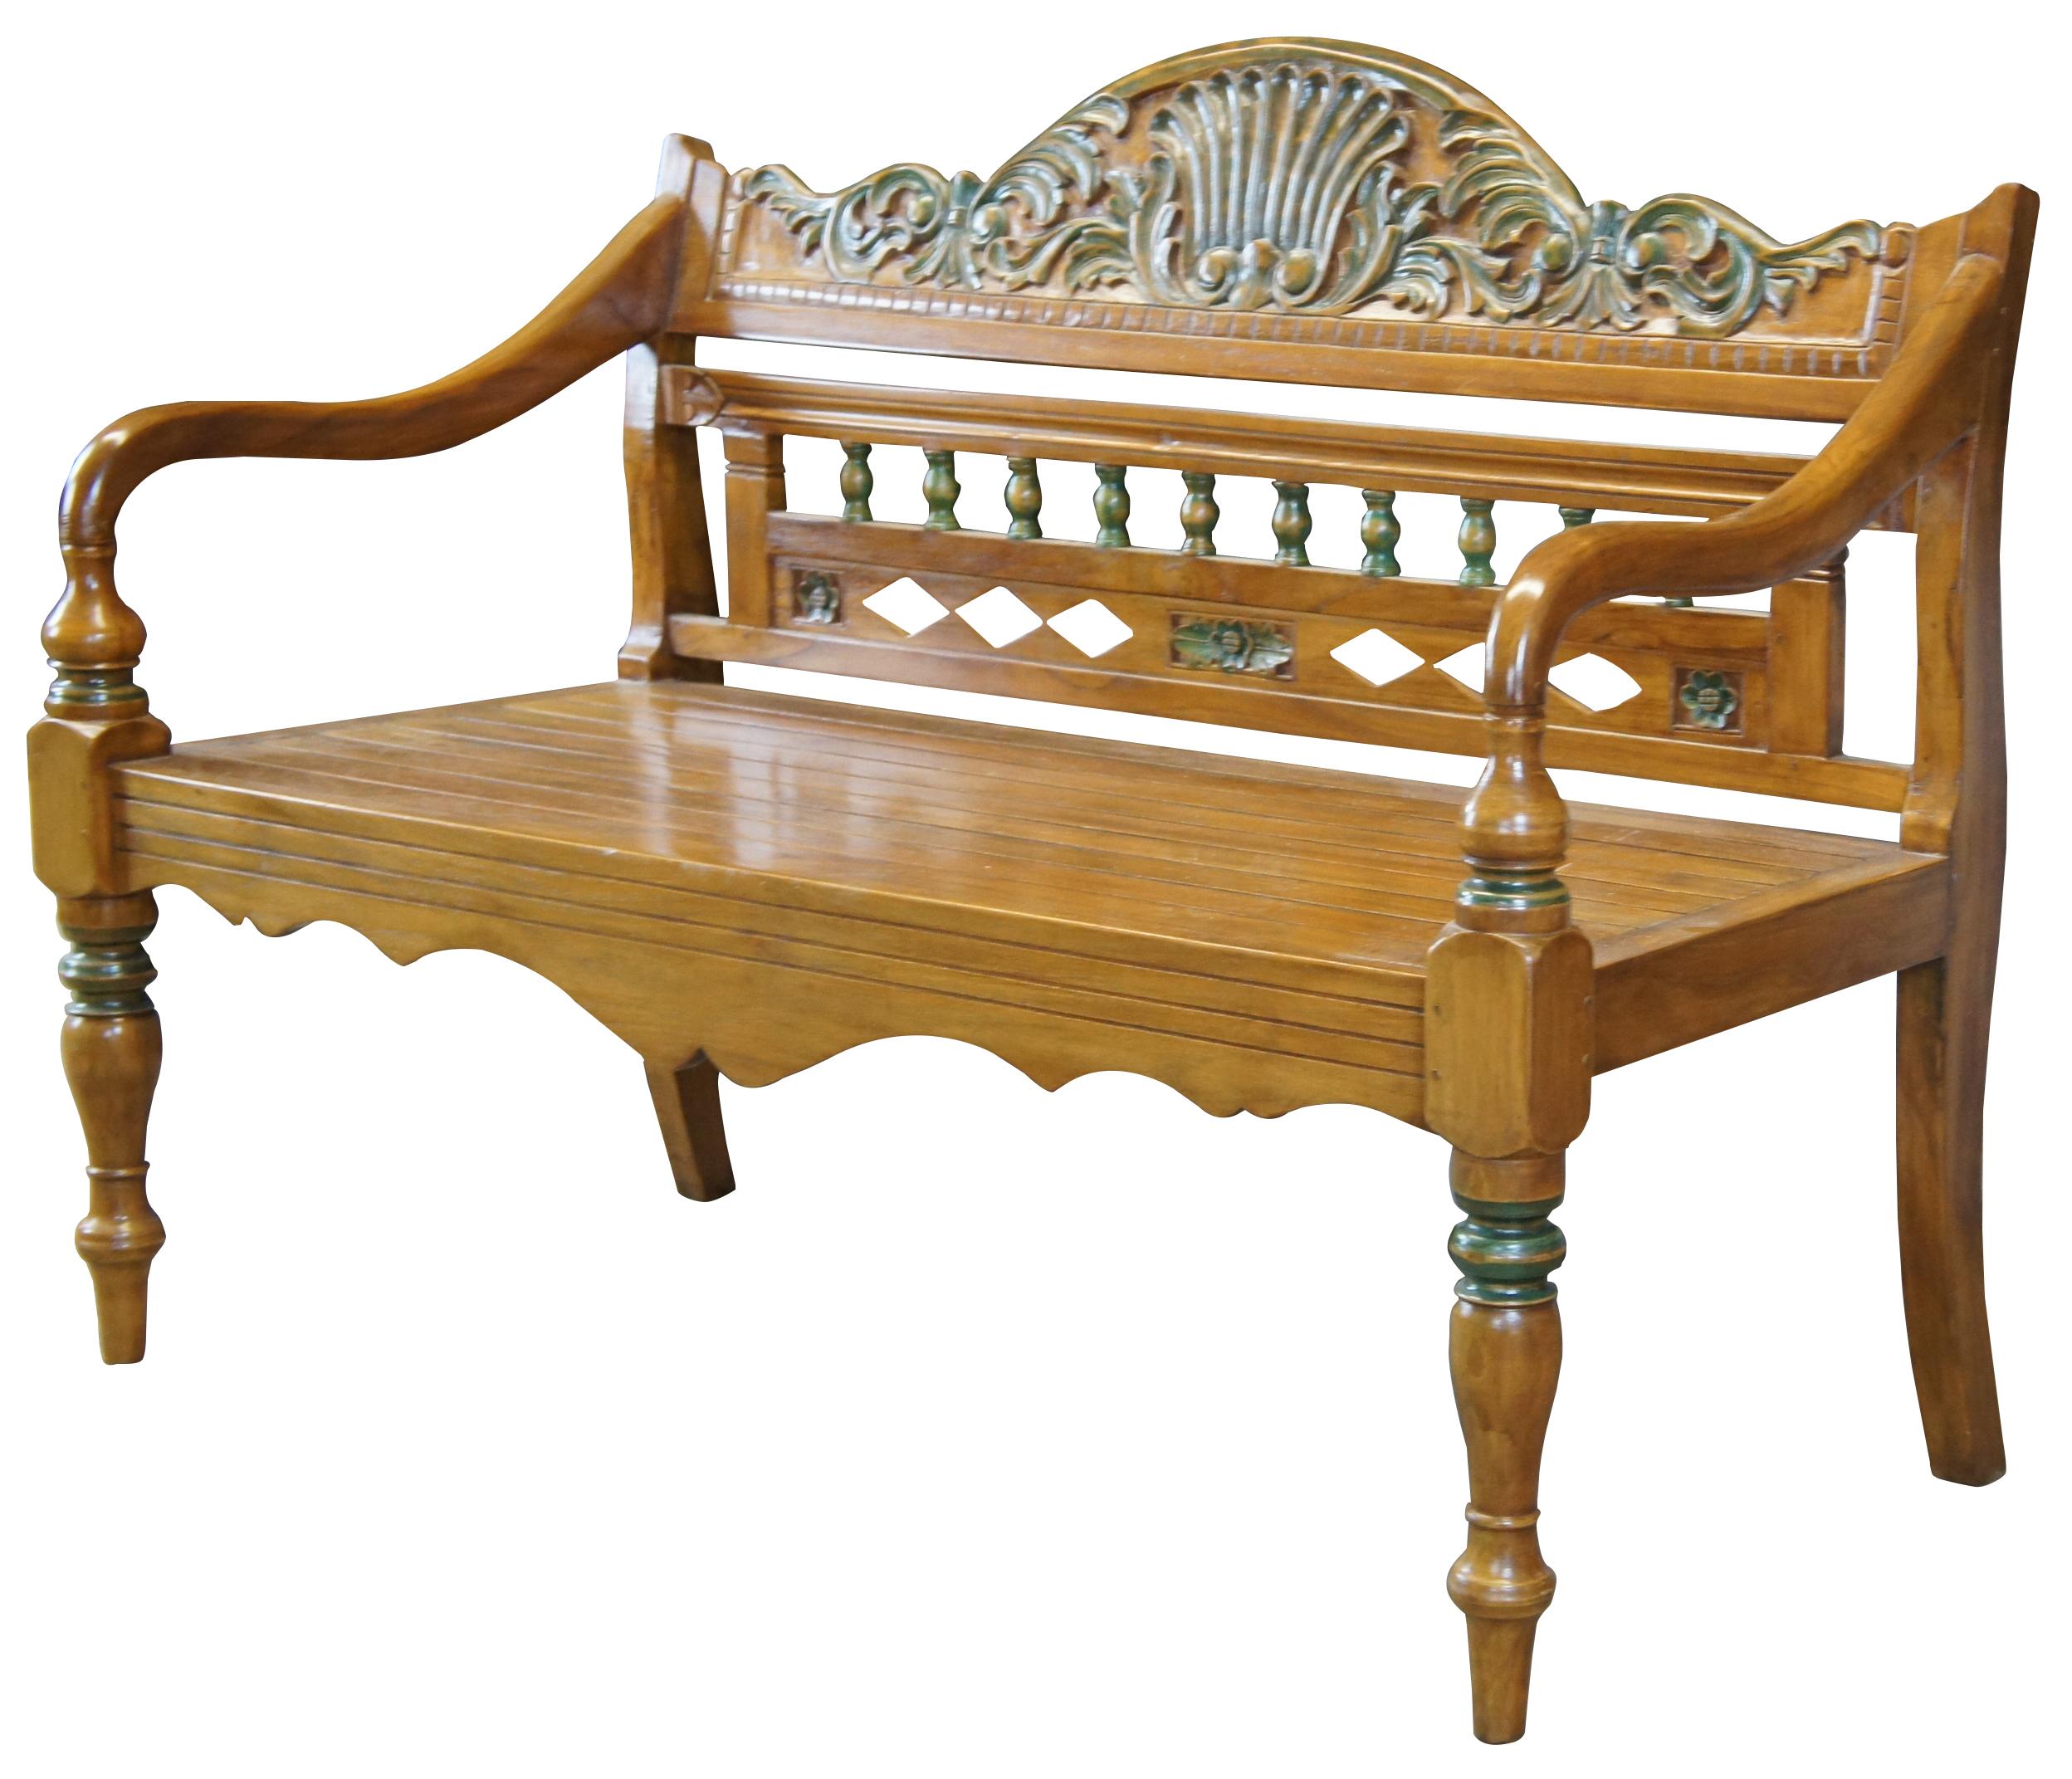 Vintage Arhause Furniture entry seat or hall bench. Made of teak, featuring carved scallop and leaf designs along the crest, rounded turnings and diamond-shaped piercings to the back, a slatted seat, curved armrests, and lathe-turned legs. Made in